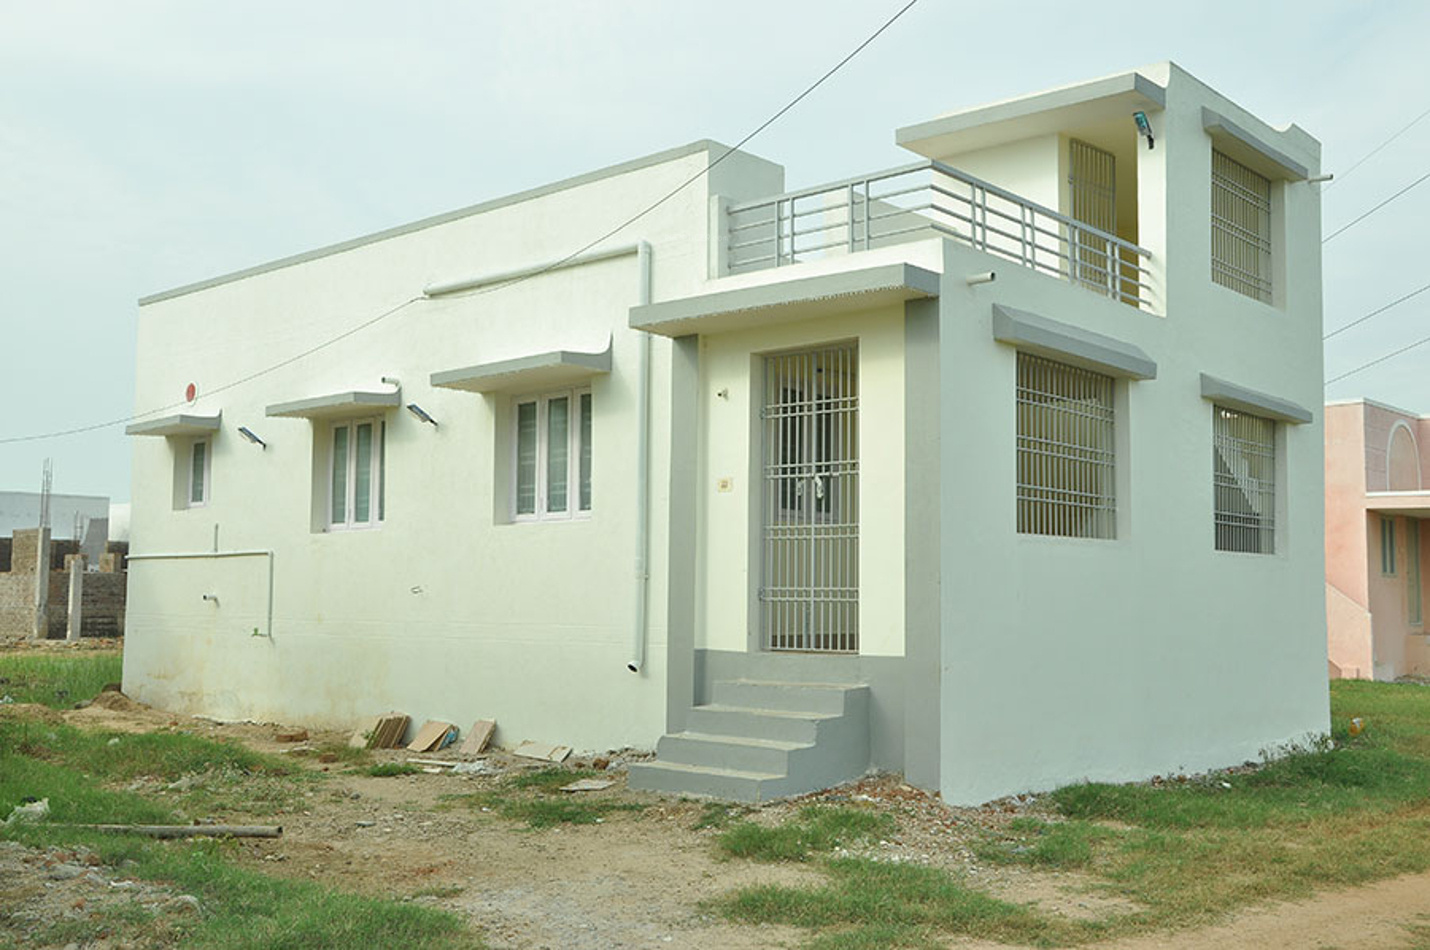 ,House For Rent In Thiruvottiyur  ,house for rent in thiruvottiyur olx  ,house for rent in thiruvottiyur railway station  ,house for rent in thiruvottiyur theradi  ,1 bhk house for rent in thiruvottiyur  ,house for rent in jothi nagar tiruvottiyur  ,individual house for rent in chennai thiruvottiyur  ,house for rent at thiruvottiyur  ,house rent in theradi at thiruvottiyur  ,2 bhk house for rent in thiruvottiyur  ,house for rent in thiruvottiyur chennai  ,individual house for rent in thiruvottiyur  ,house for rent near thiruvottiyur  ,2 bhk house for rent near thiruvottiyur  ,house for rent in tollgate thiruvottiyur  ,house for sale in thiruvottiyur olx  ,house for lease in thiruvottiyur in olx  ,house for sale in thiruvottiyur quikr  ,house for lease in thiruvottiyur theradi  ,1 bhk house for lease in thiruvottiyur  ,House For Rent  ,house for rent bandung  ,house for rent in bali  ,house for rent in jakarta  ,house for rent in singapore  ,house for rent melbourne  ,house for rent in yogyakarta  ,house for rent near me  ,house for rent canggu bali  ,house for rent london  ,house for rent kemang  ,house for rent sanur  ,house for rent gading serpong  ,house for rent in pondok indah jakarta  ,house for rent in bsd city jakarta  ,house for rent in jimbaran bali  ,house for rent in ubud  ,house for rent jimbaran  ,house for rent pondok indah  ,house for rent in salem  ,house for rent denpasar  ,house for rent atlanta  ,house for rent auckland  ,house for rent austin tx  ,house for rent adelaide  ,house for rent around me  ,house for rent antipolo  ,house for rent athens ga  ,house for rent asheville nc  ,house for rent angeles city  ,house for rent augusta ga  ,house for rent abbotsford  ,house for rent albany ny  ,house for rent ajax  ,house for rent apps  ,house for rent allentown pa  ,house for rent aurora co  ,house for rent anaheim  ,house for rent aurora  ,house for rent alabang